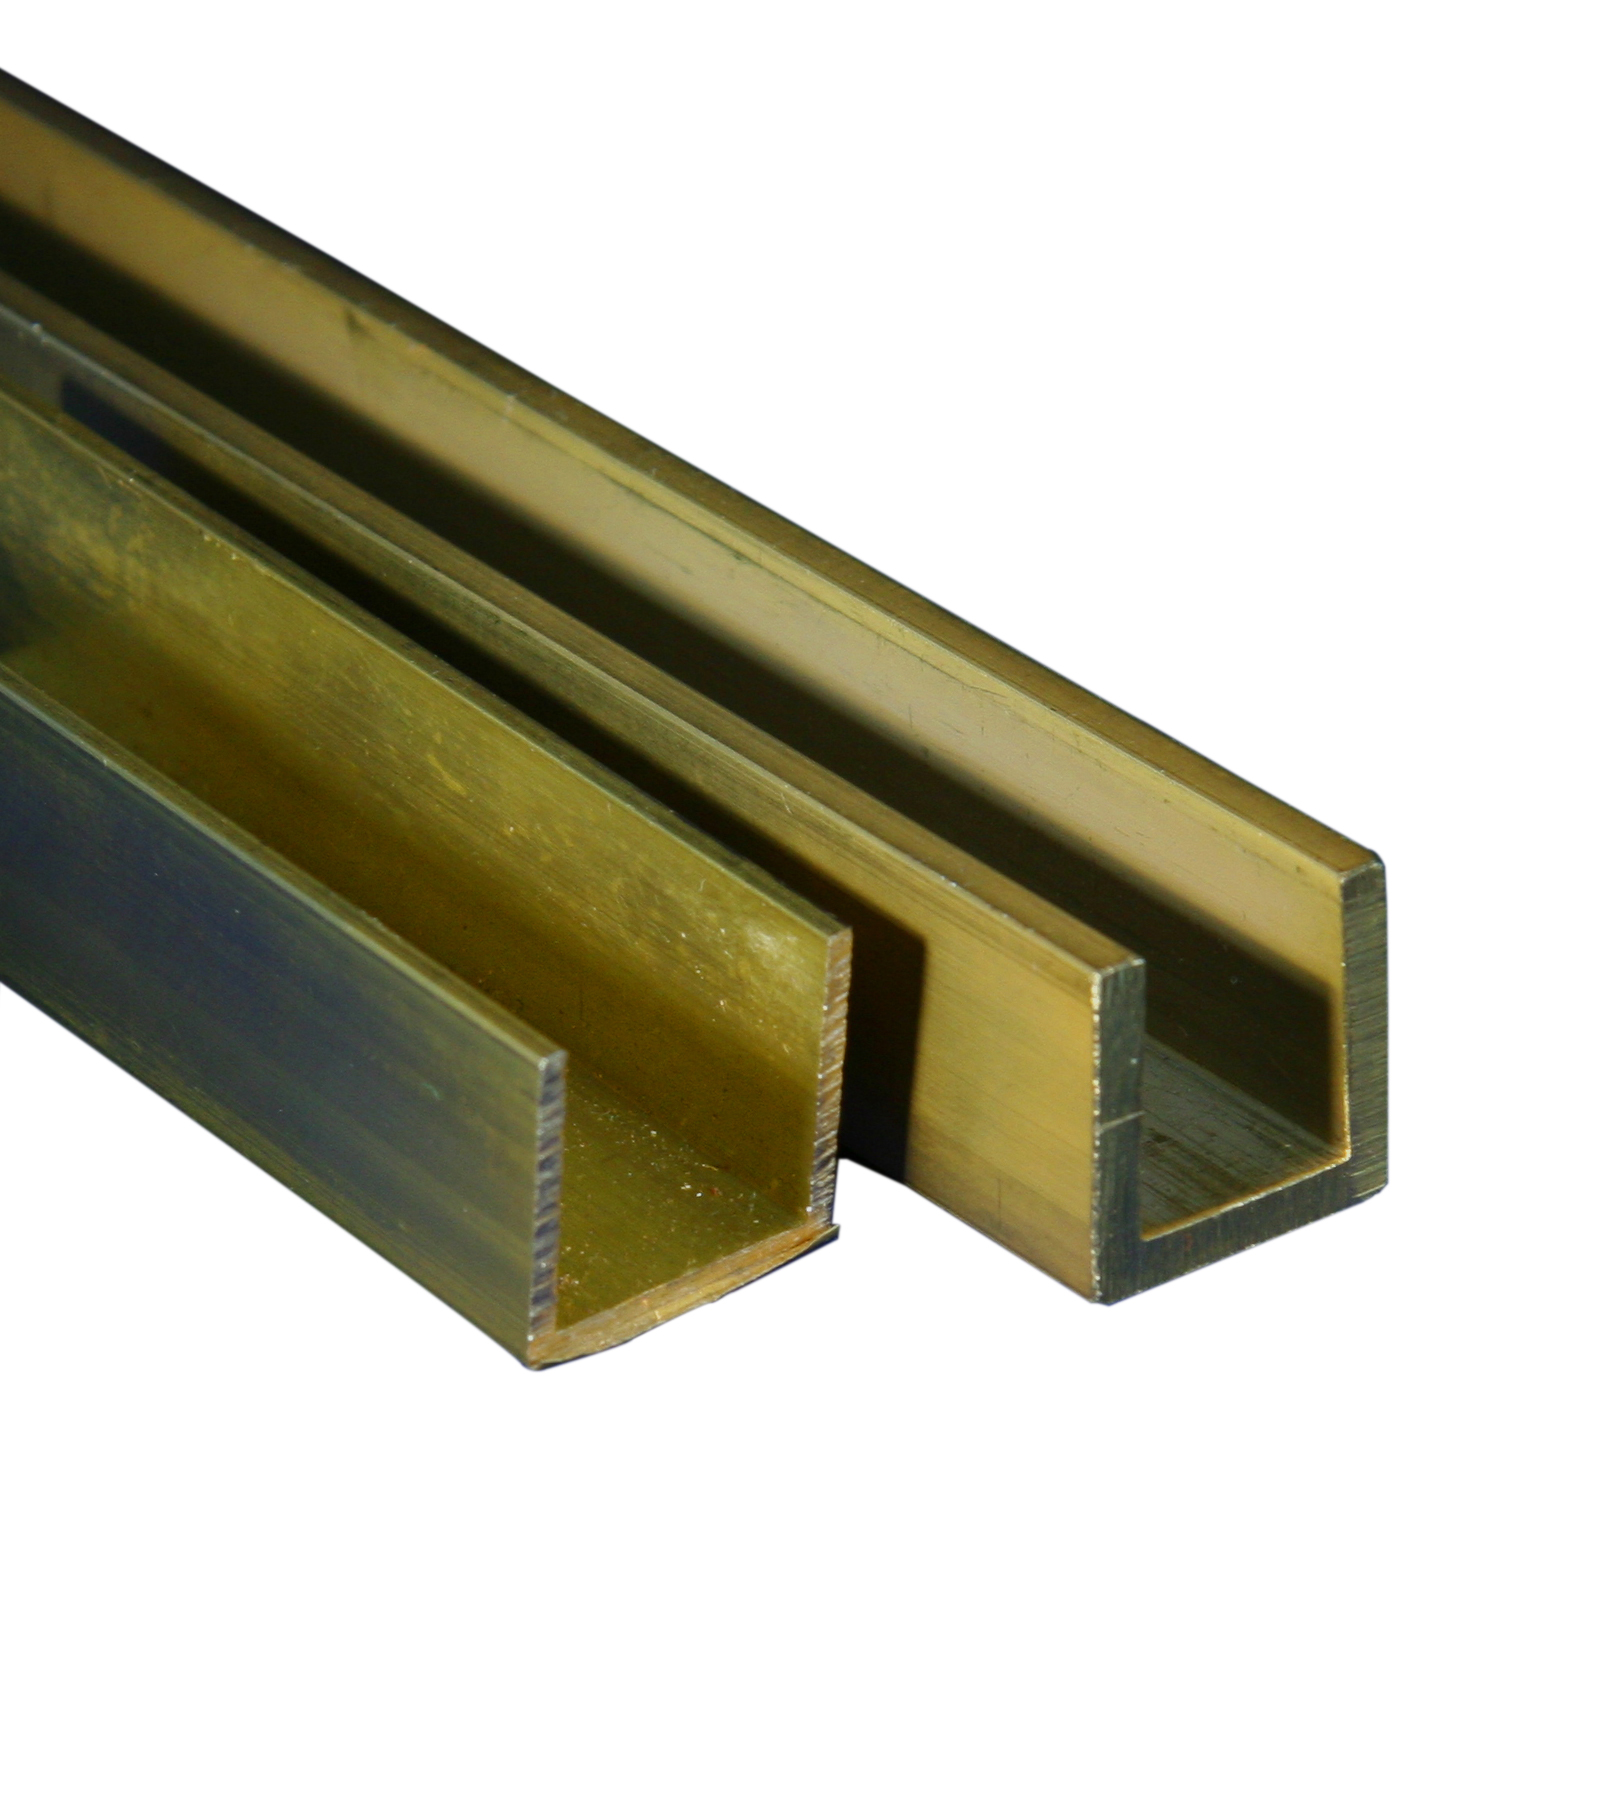 What is the difference between Brass and Bronze material and their use in  architectural grilles and metal work? - AAG2020